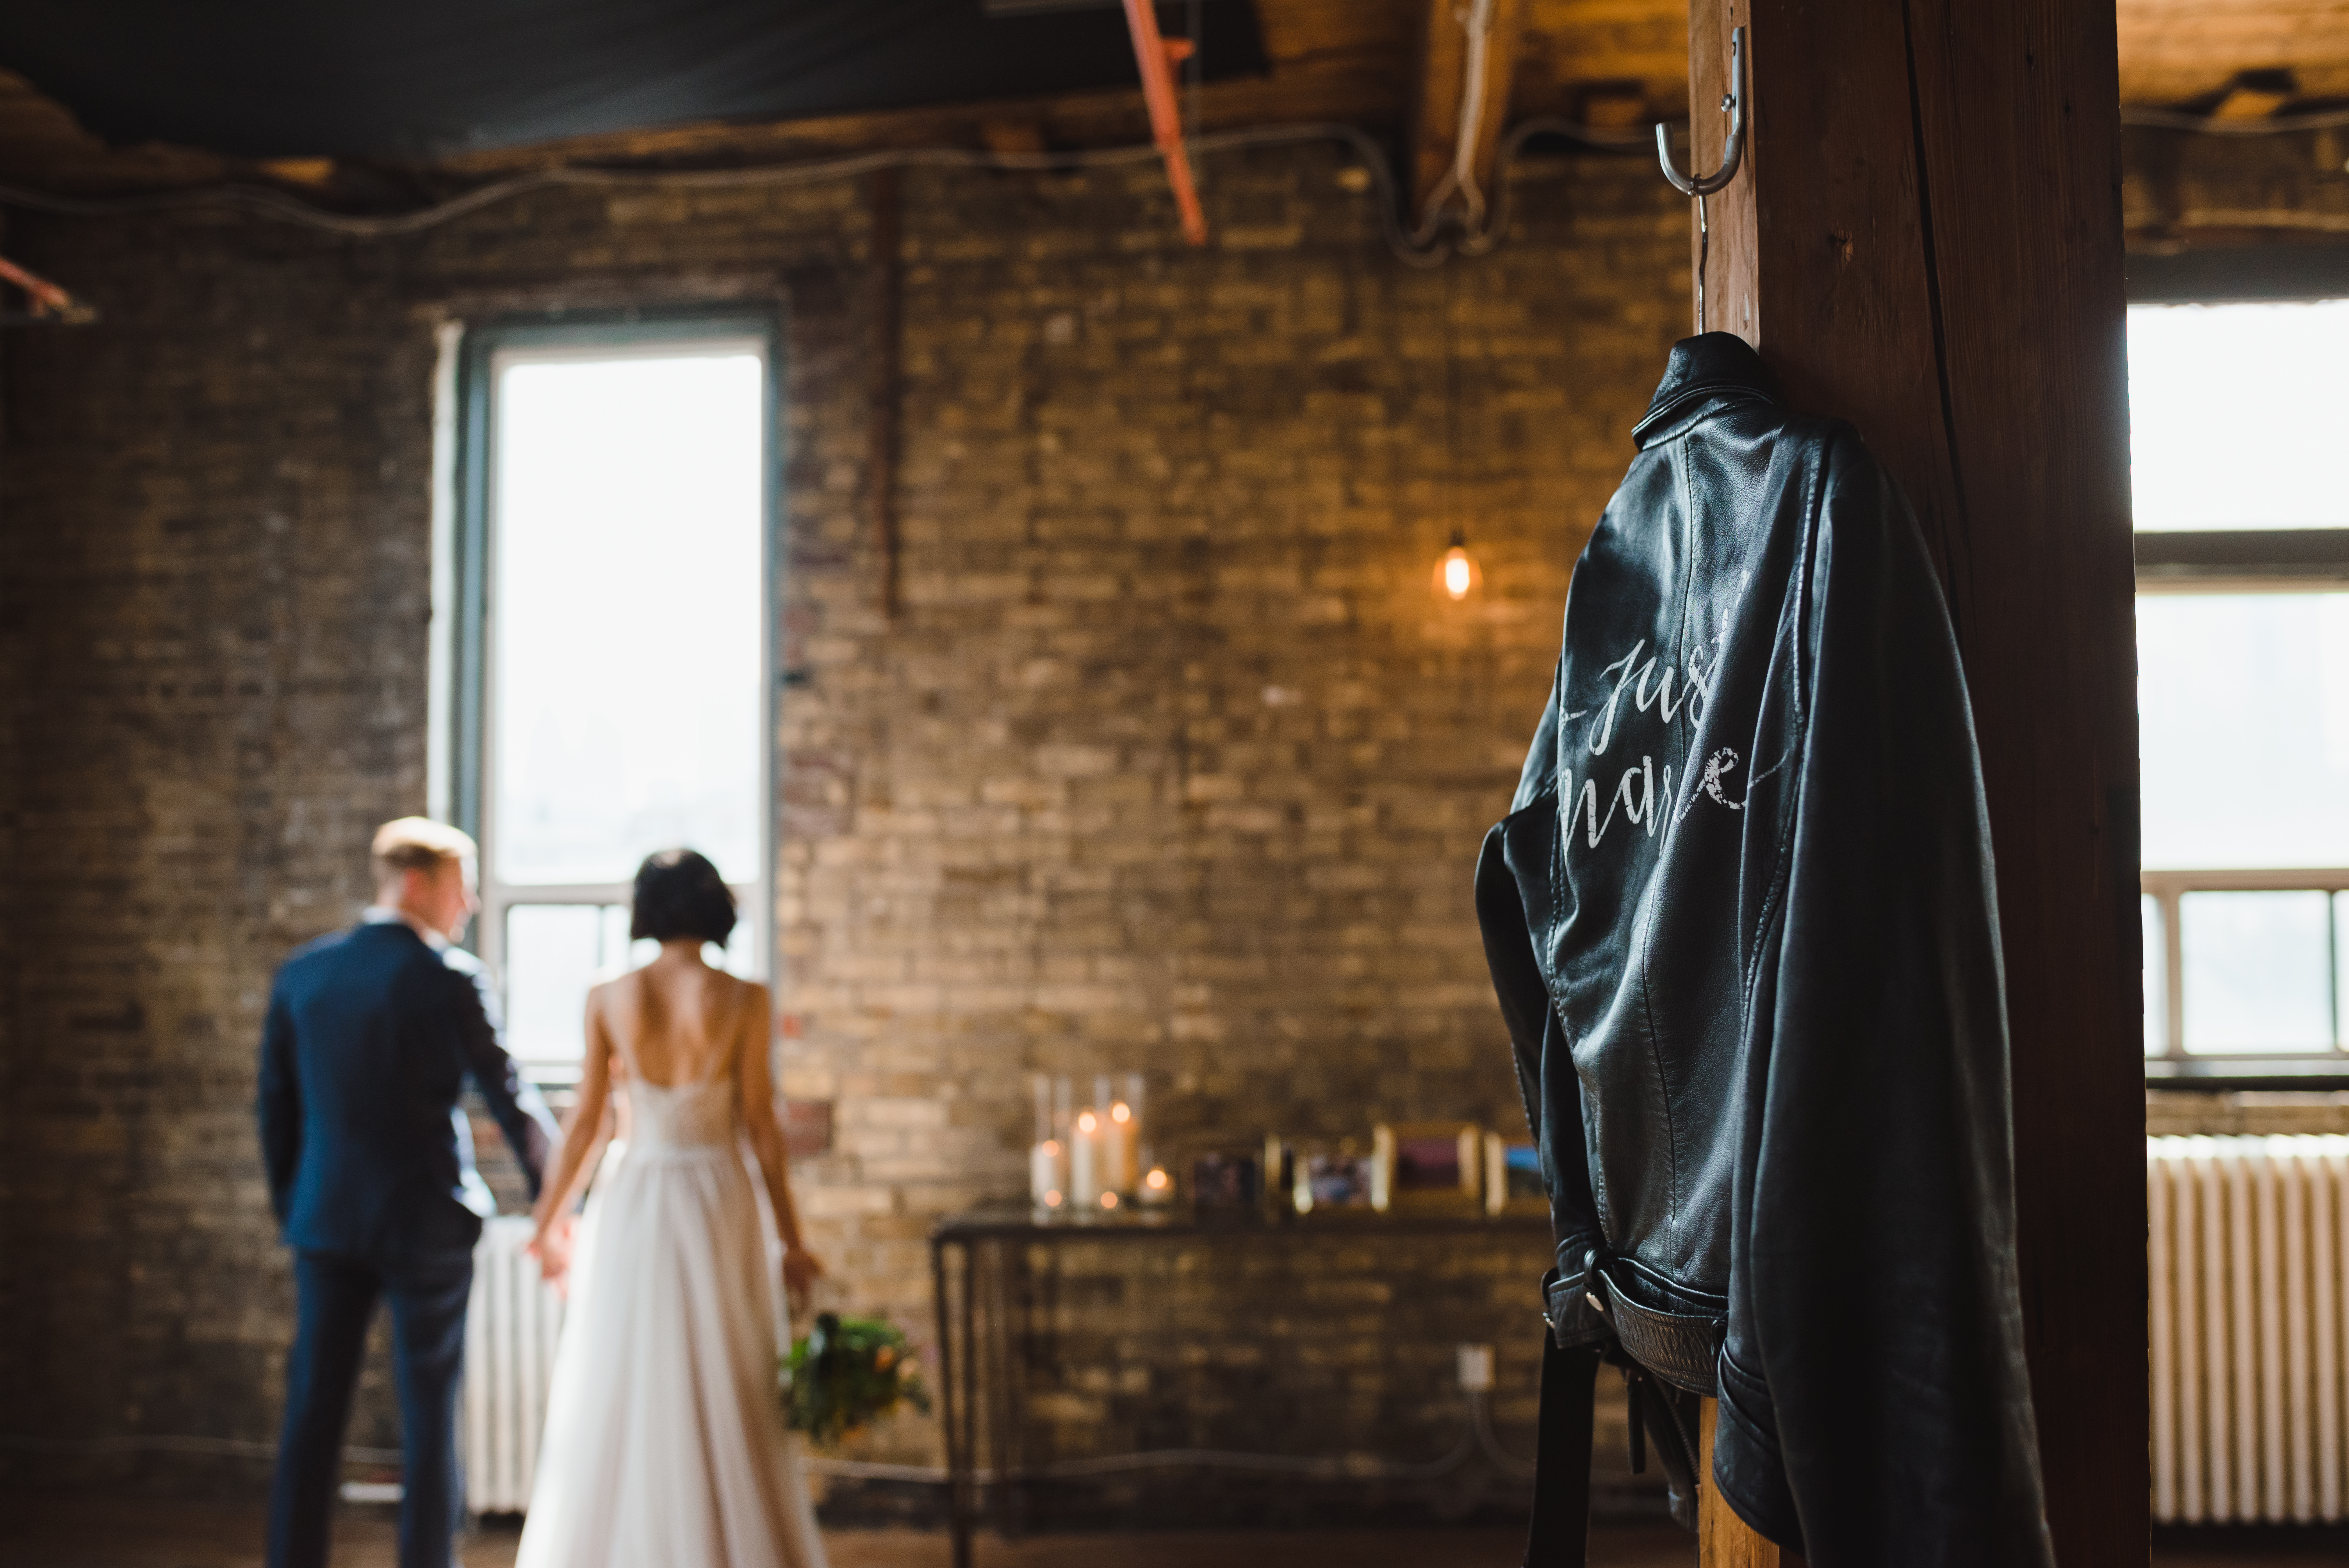 Just married leather jacket and bride and groom standing in font of window in background Jam Factory Toronto wedding photographer